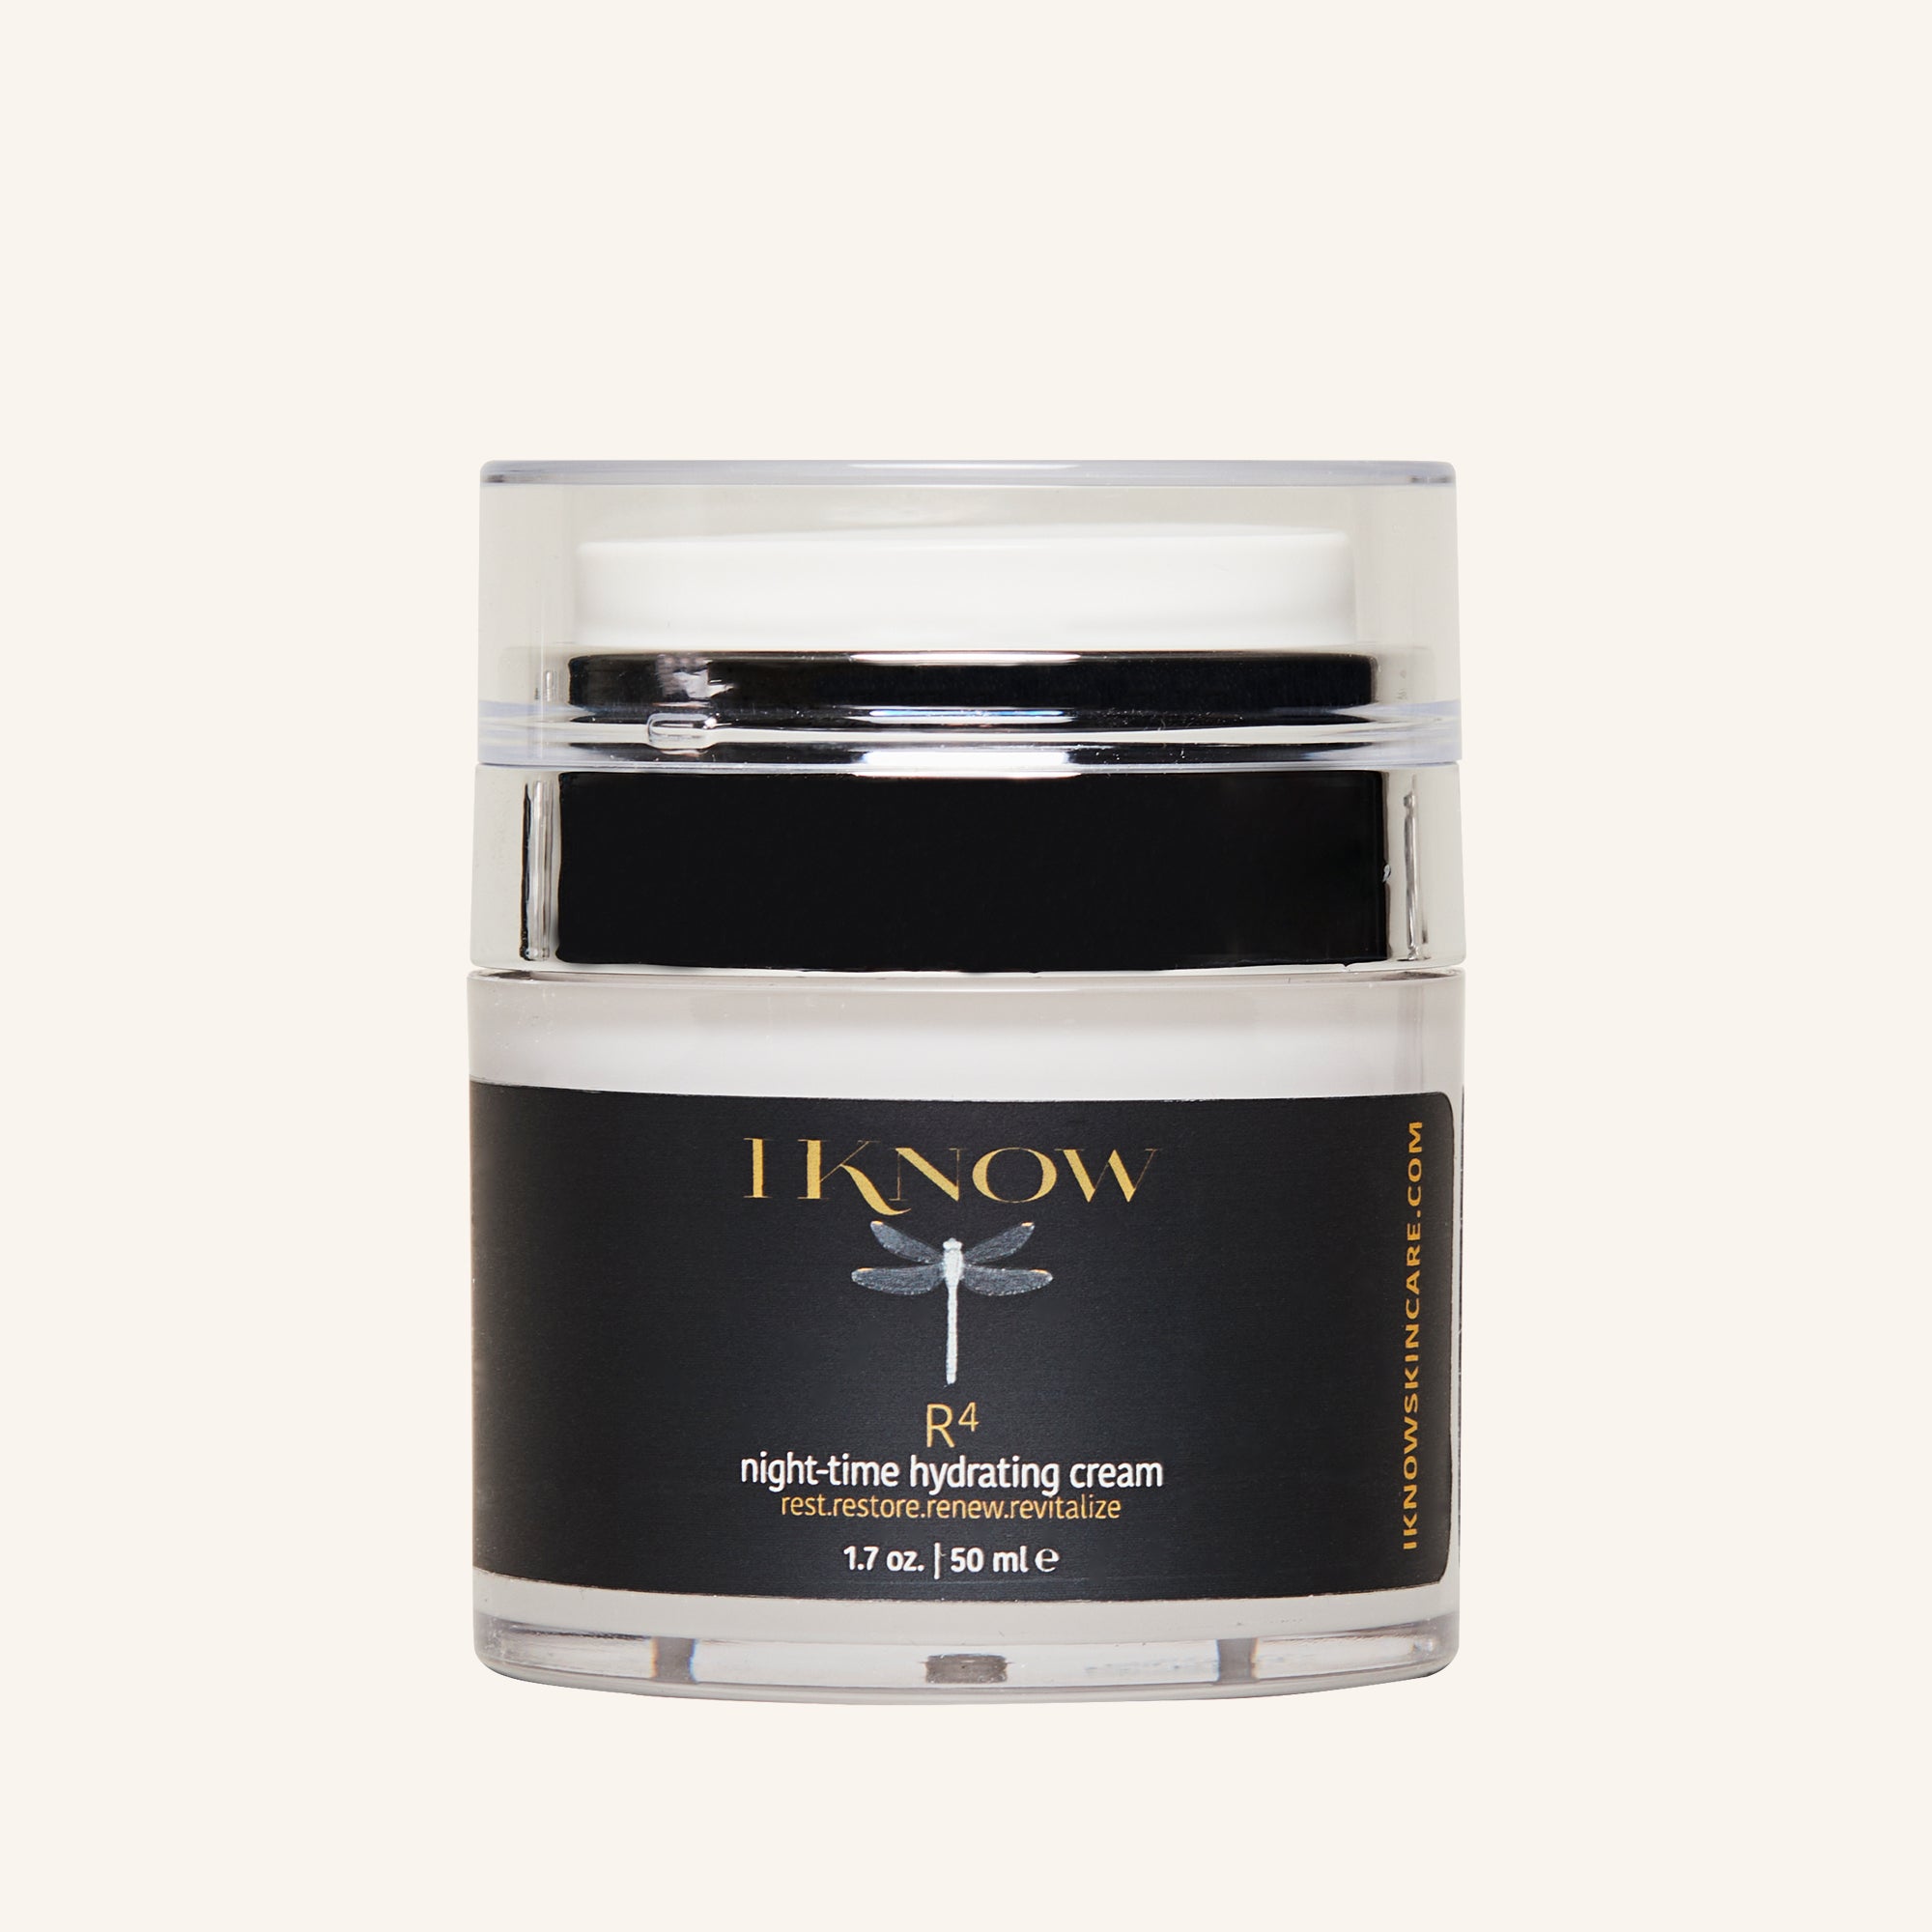 IKNOW R4 Night-time Hydrating Cream replenishes dry skin and boosts suppleness